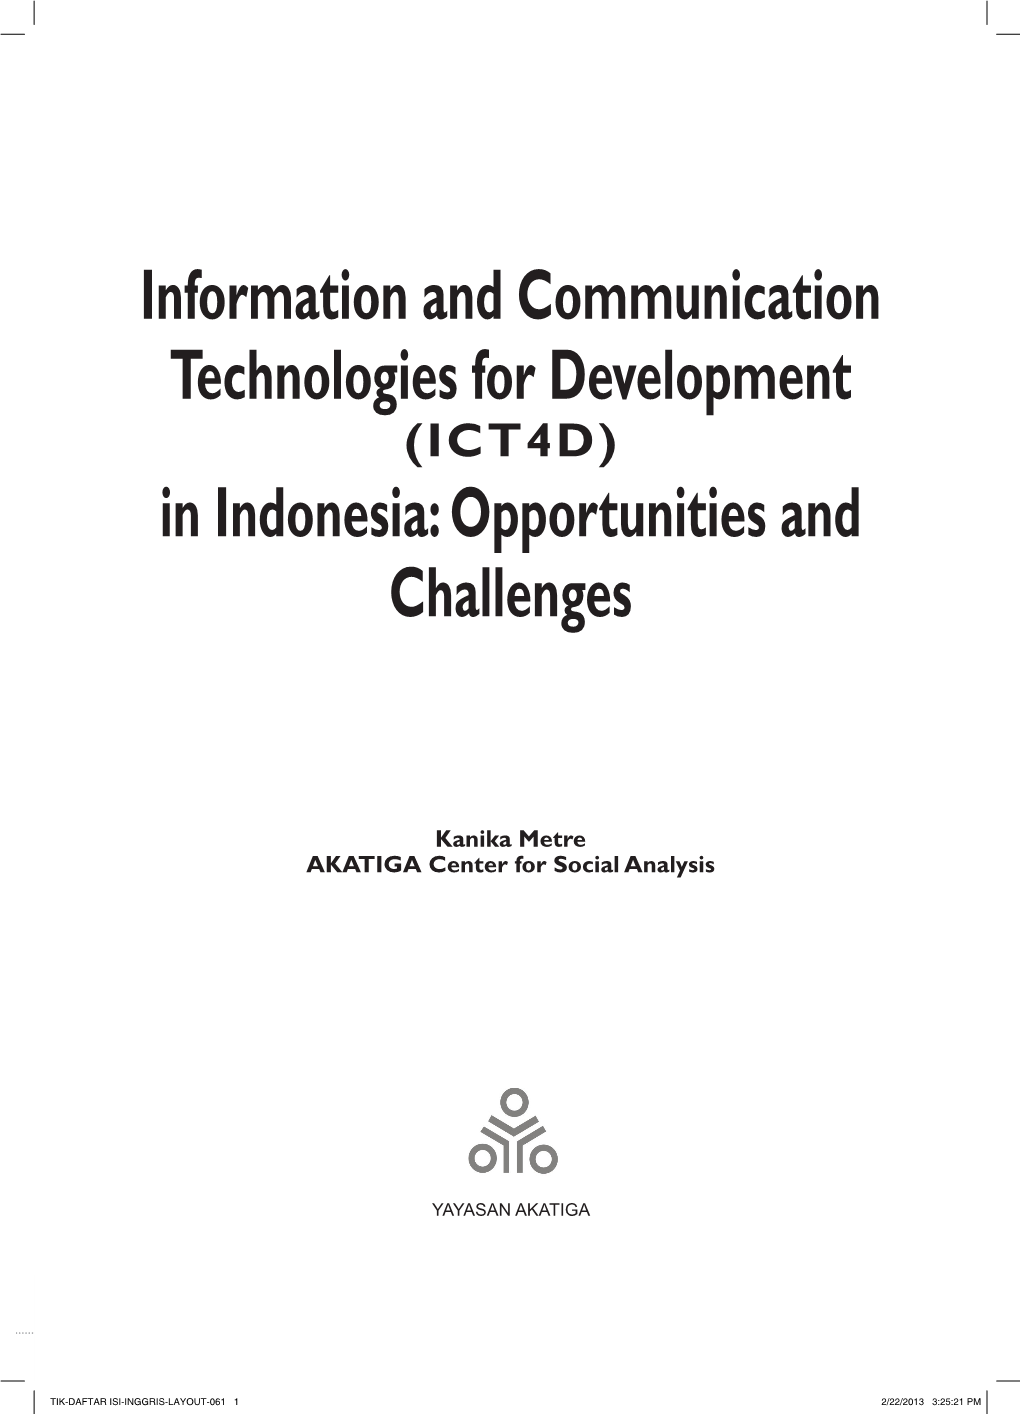 Information and Communication Technologies for Development (ICT4D) in Indonesia: Opportunities and Challenges